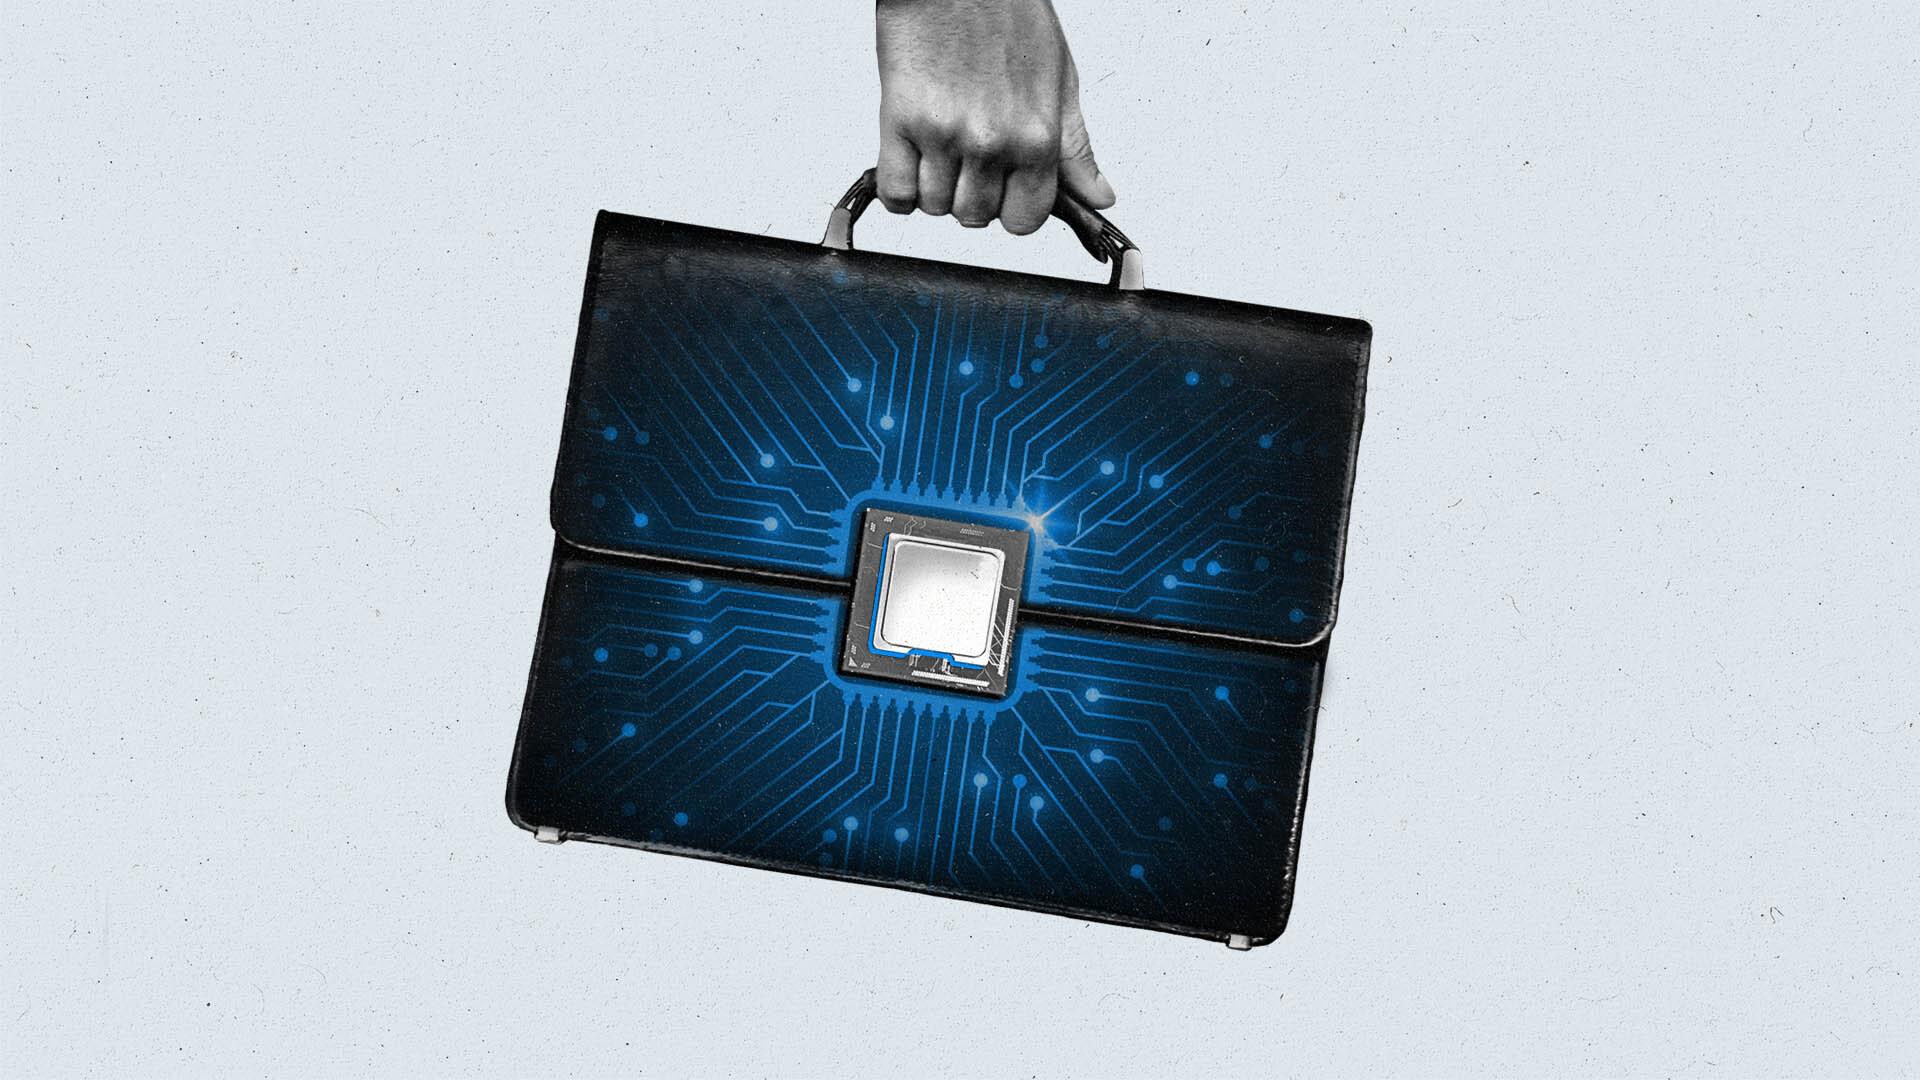 A hand holds a suitcase with a centered microchip radiating signals across circuitry.